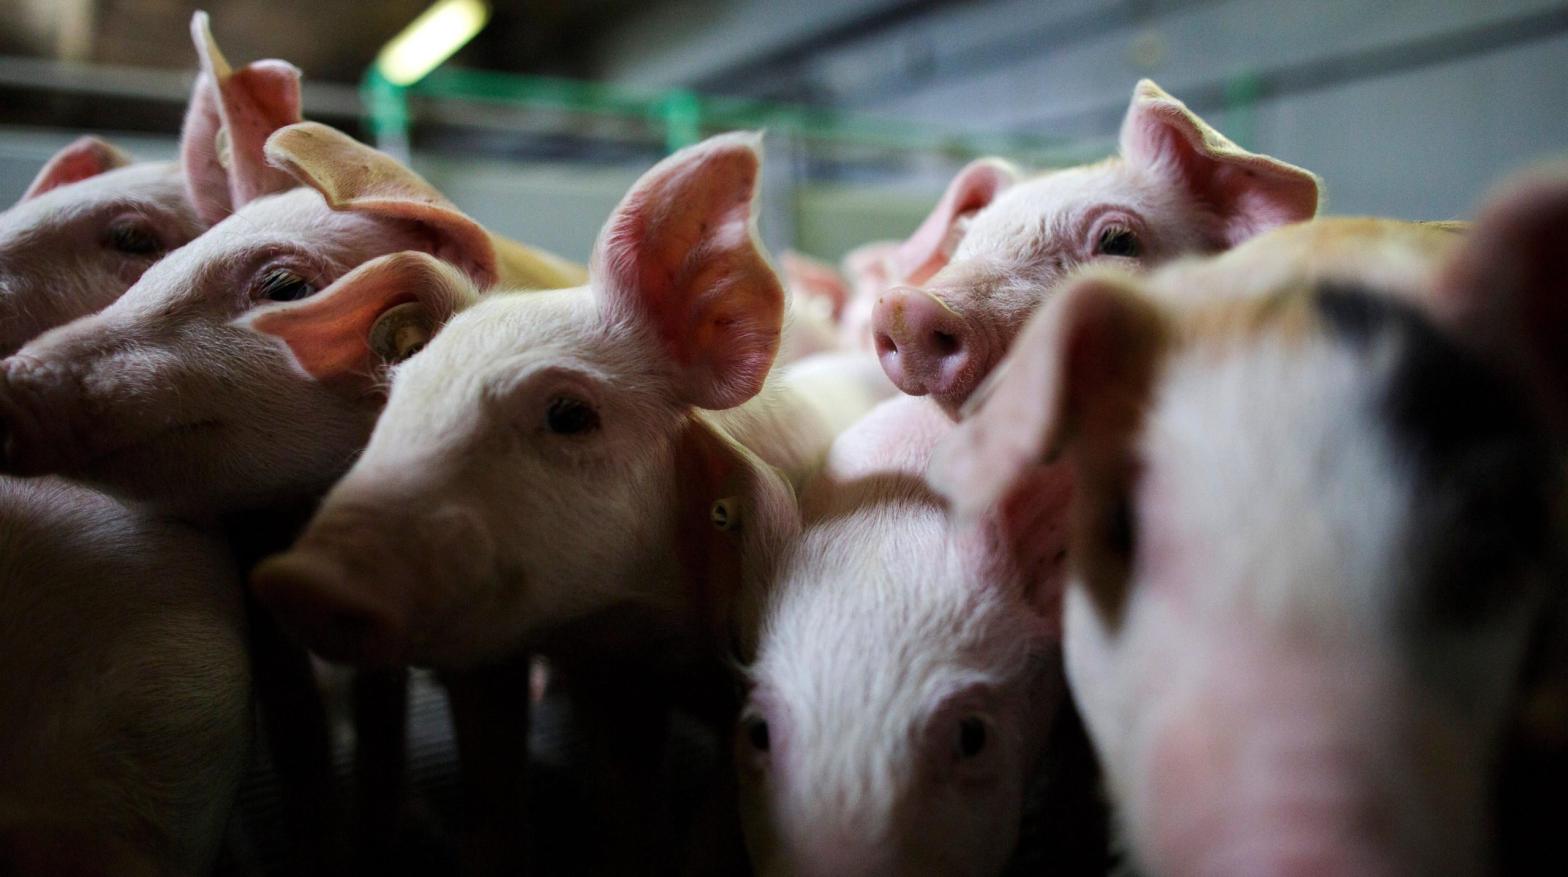 Piglets crowd a stall at the H.C. Daniels hog farm in Drahnsdorf on April 28, 2016 near Golssen, Germany (Photo: Carsten Koall, Getty Images)